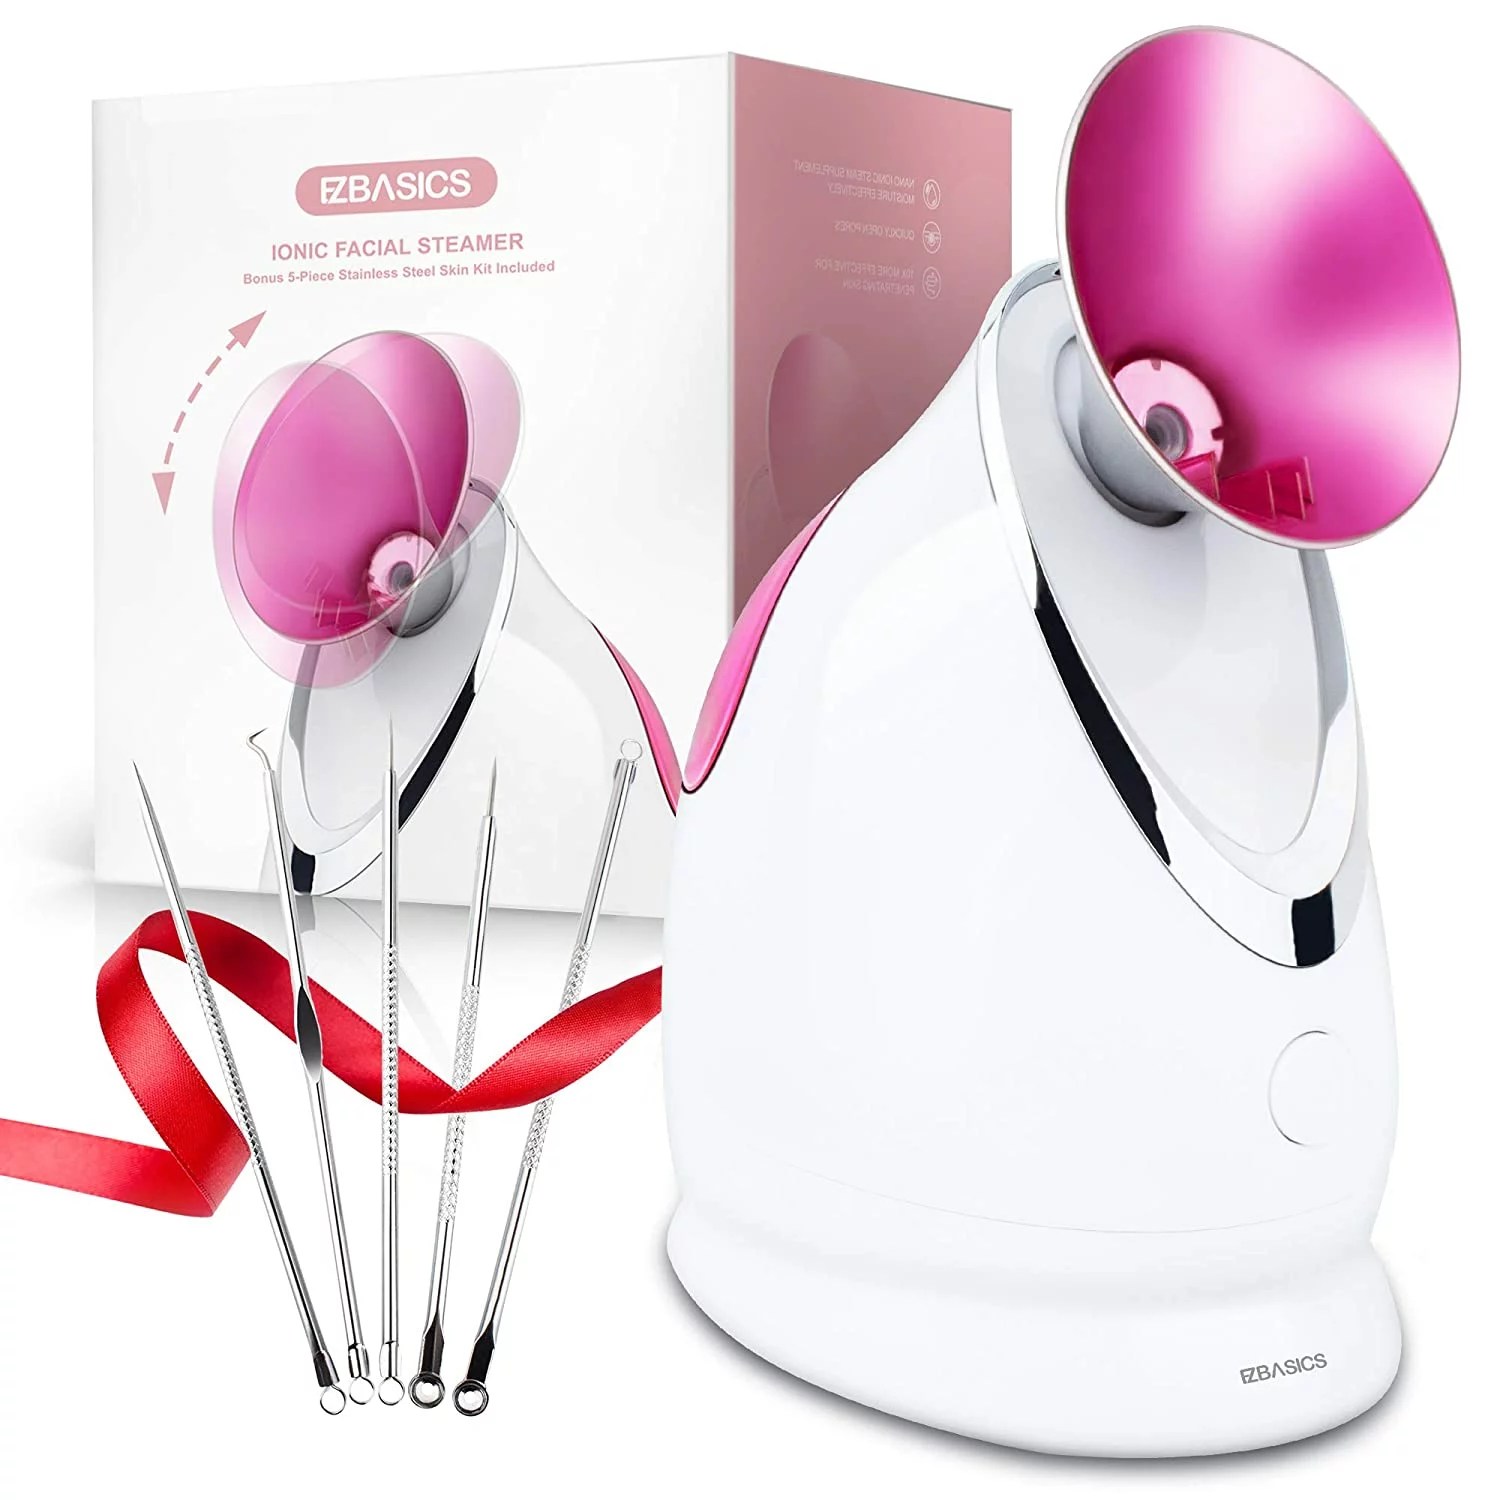 EZBASICS facial steamer in pink, with included extraction tools